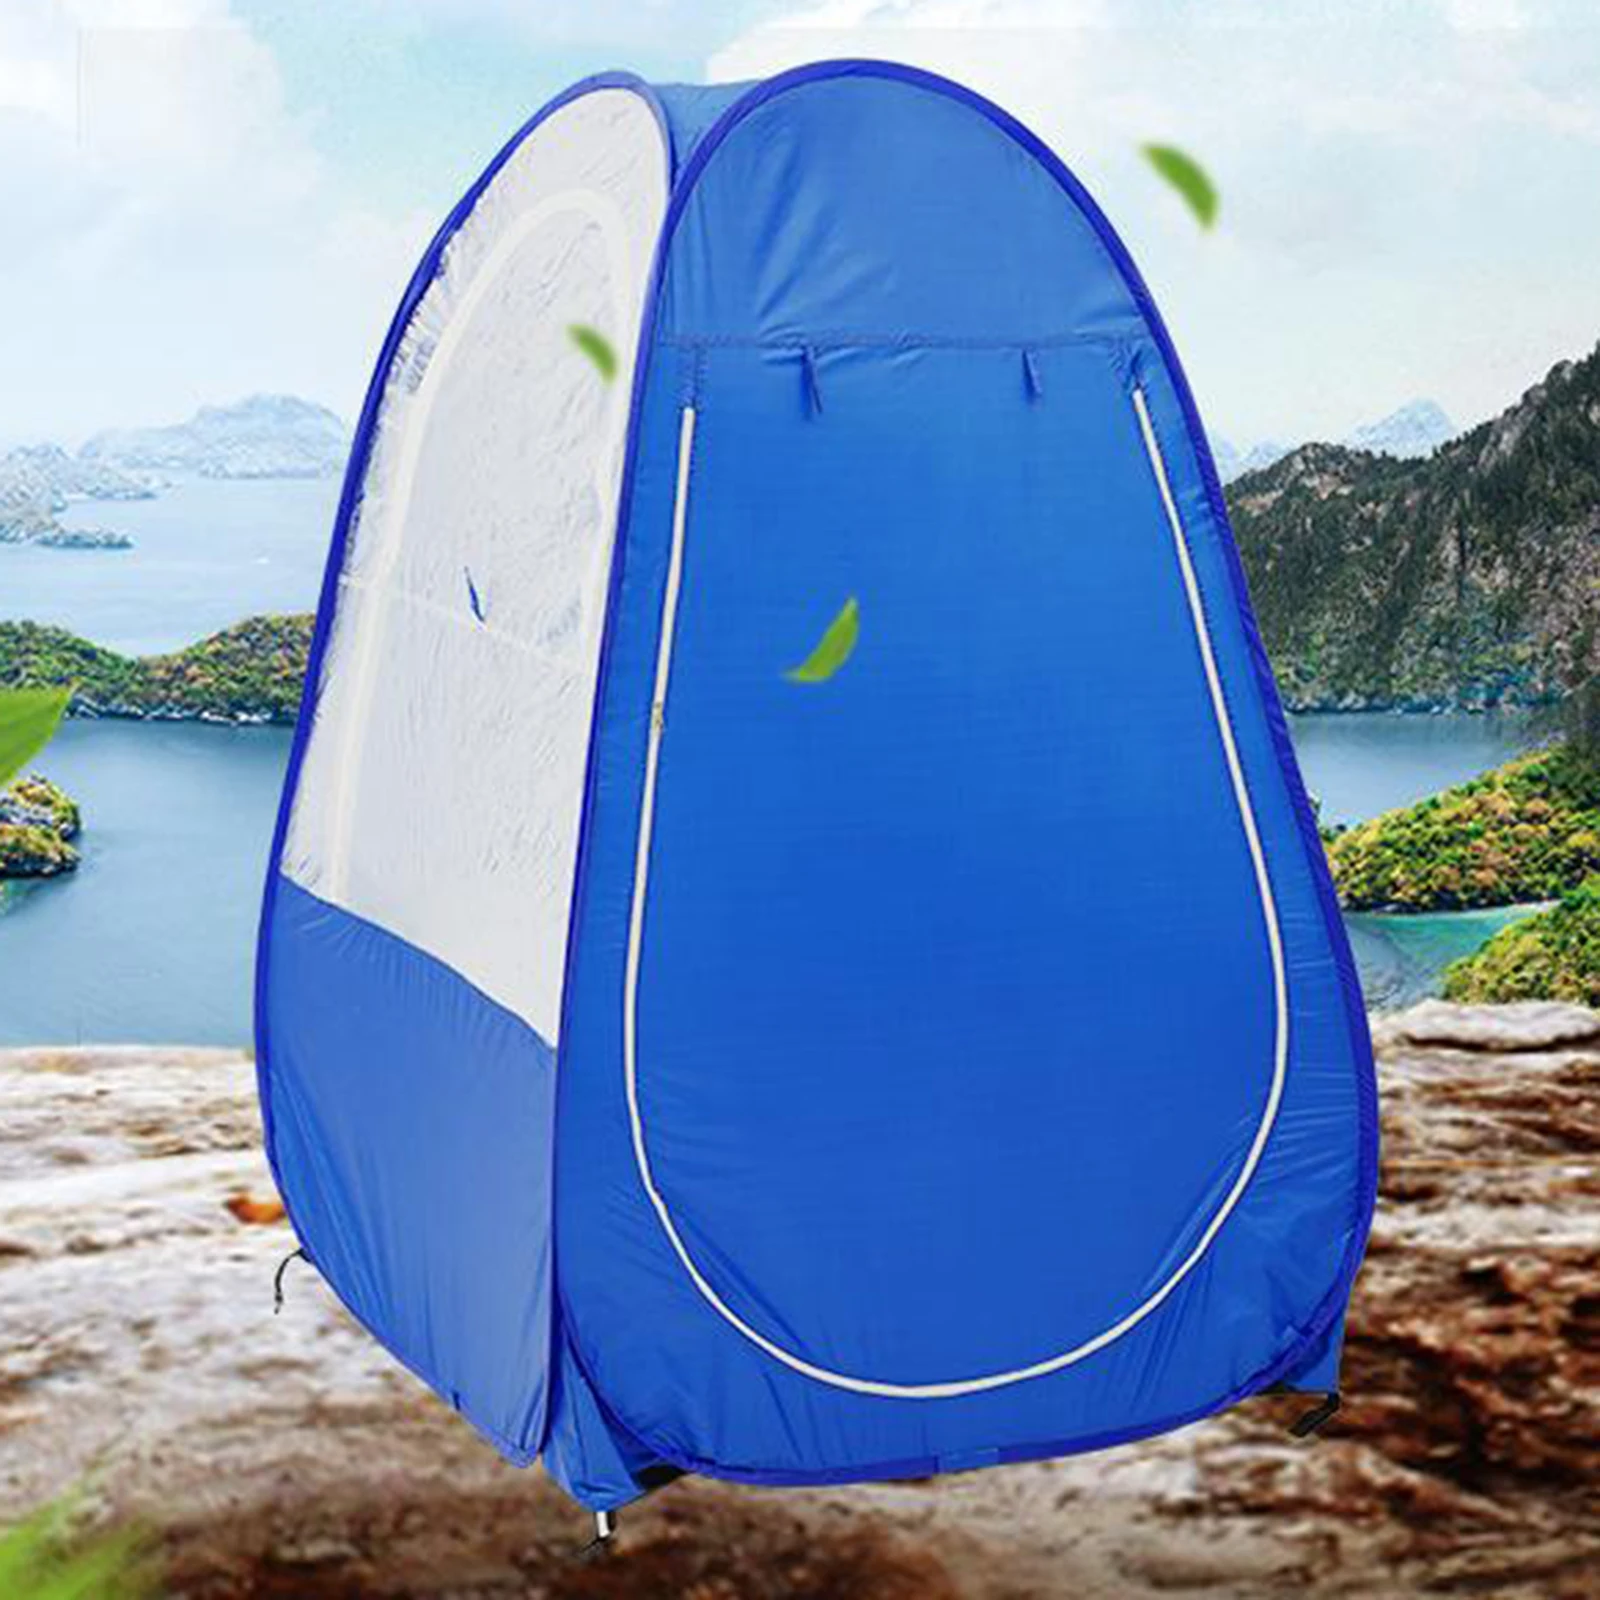 Portable Sports Shelter Weather Tent  Up Pod for Single Person w/ Carry Bag